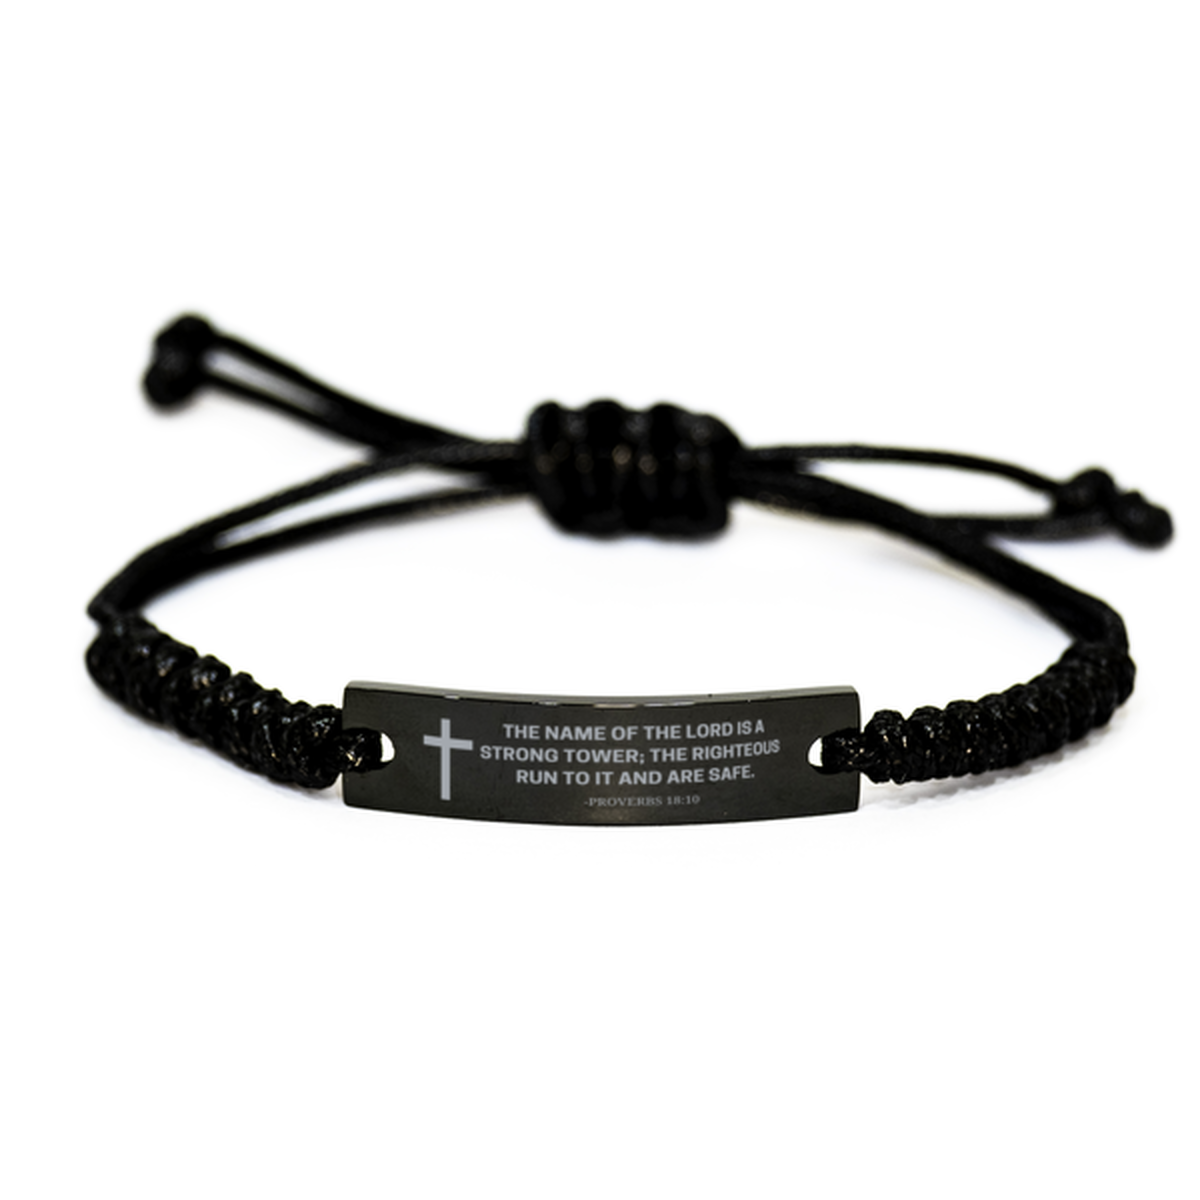 Baptism Gifts For Teenage Boys Girls, Christian Bible Verse Black Rope Bracelet, The name of the Lord is a strong, Catholic Confirmation Gifts for Son, Godson, Grandson, Nephew